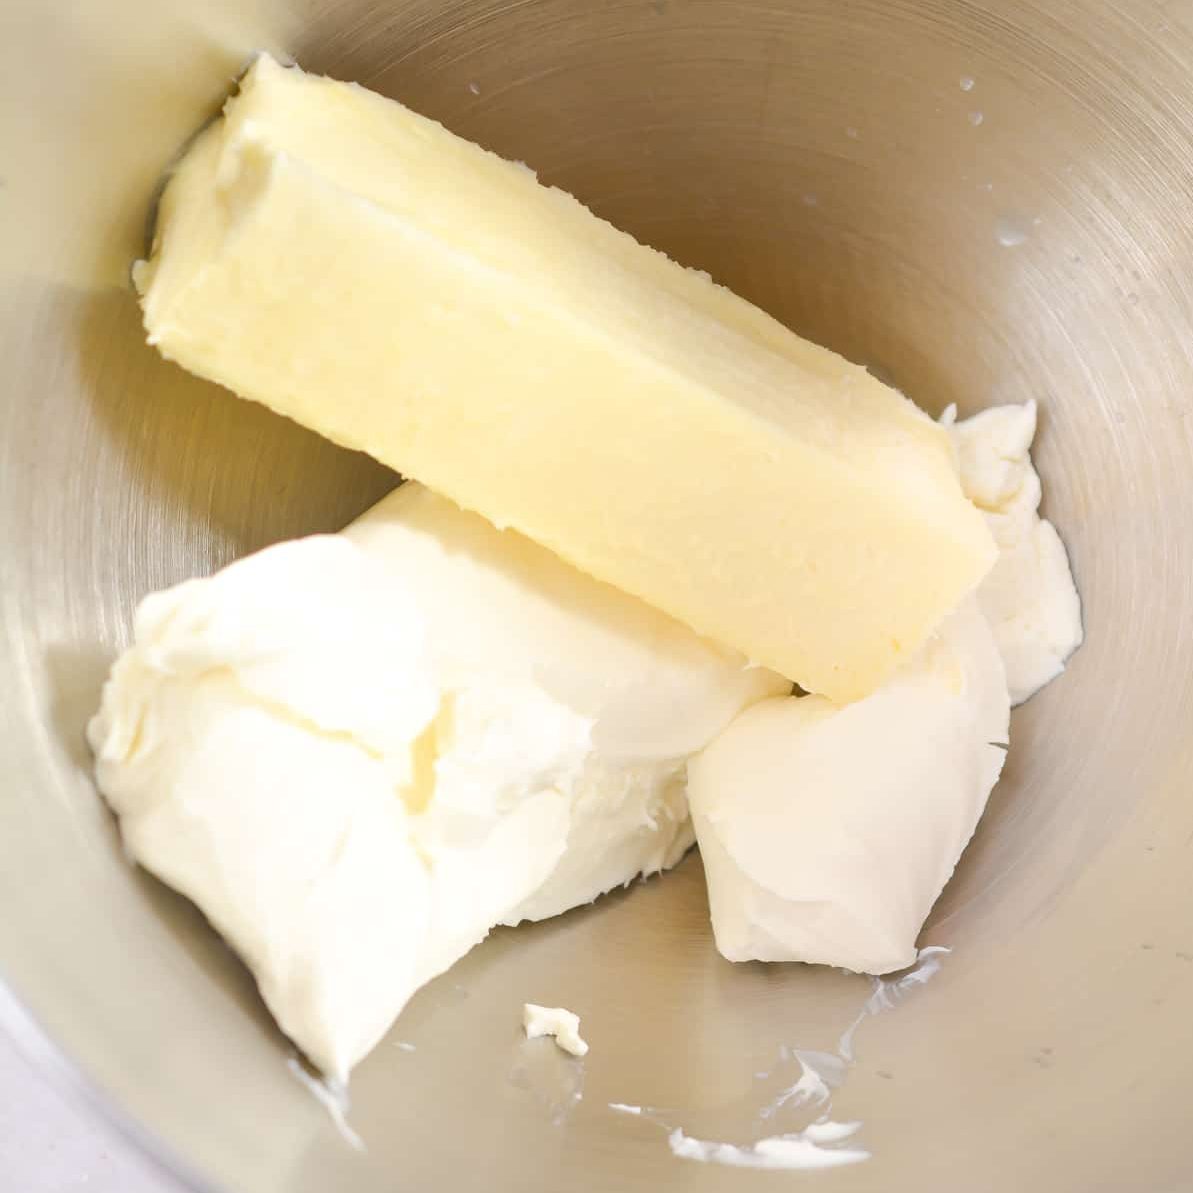 In a mixing bowl, add 8oz cream cheese softened and 1 stick of butter.